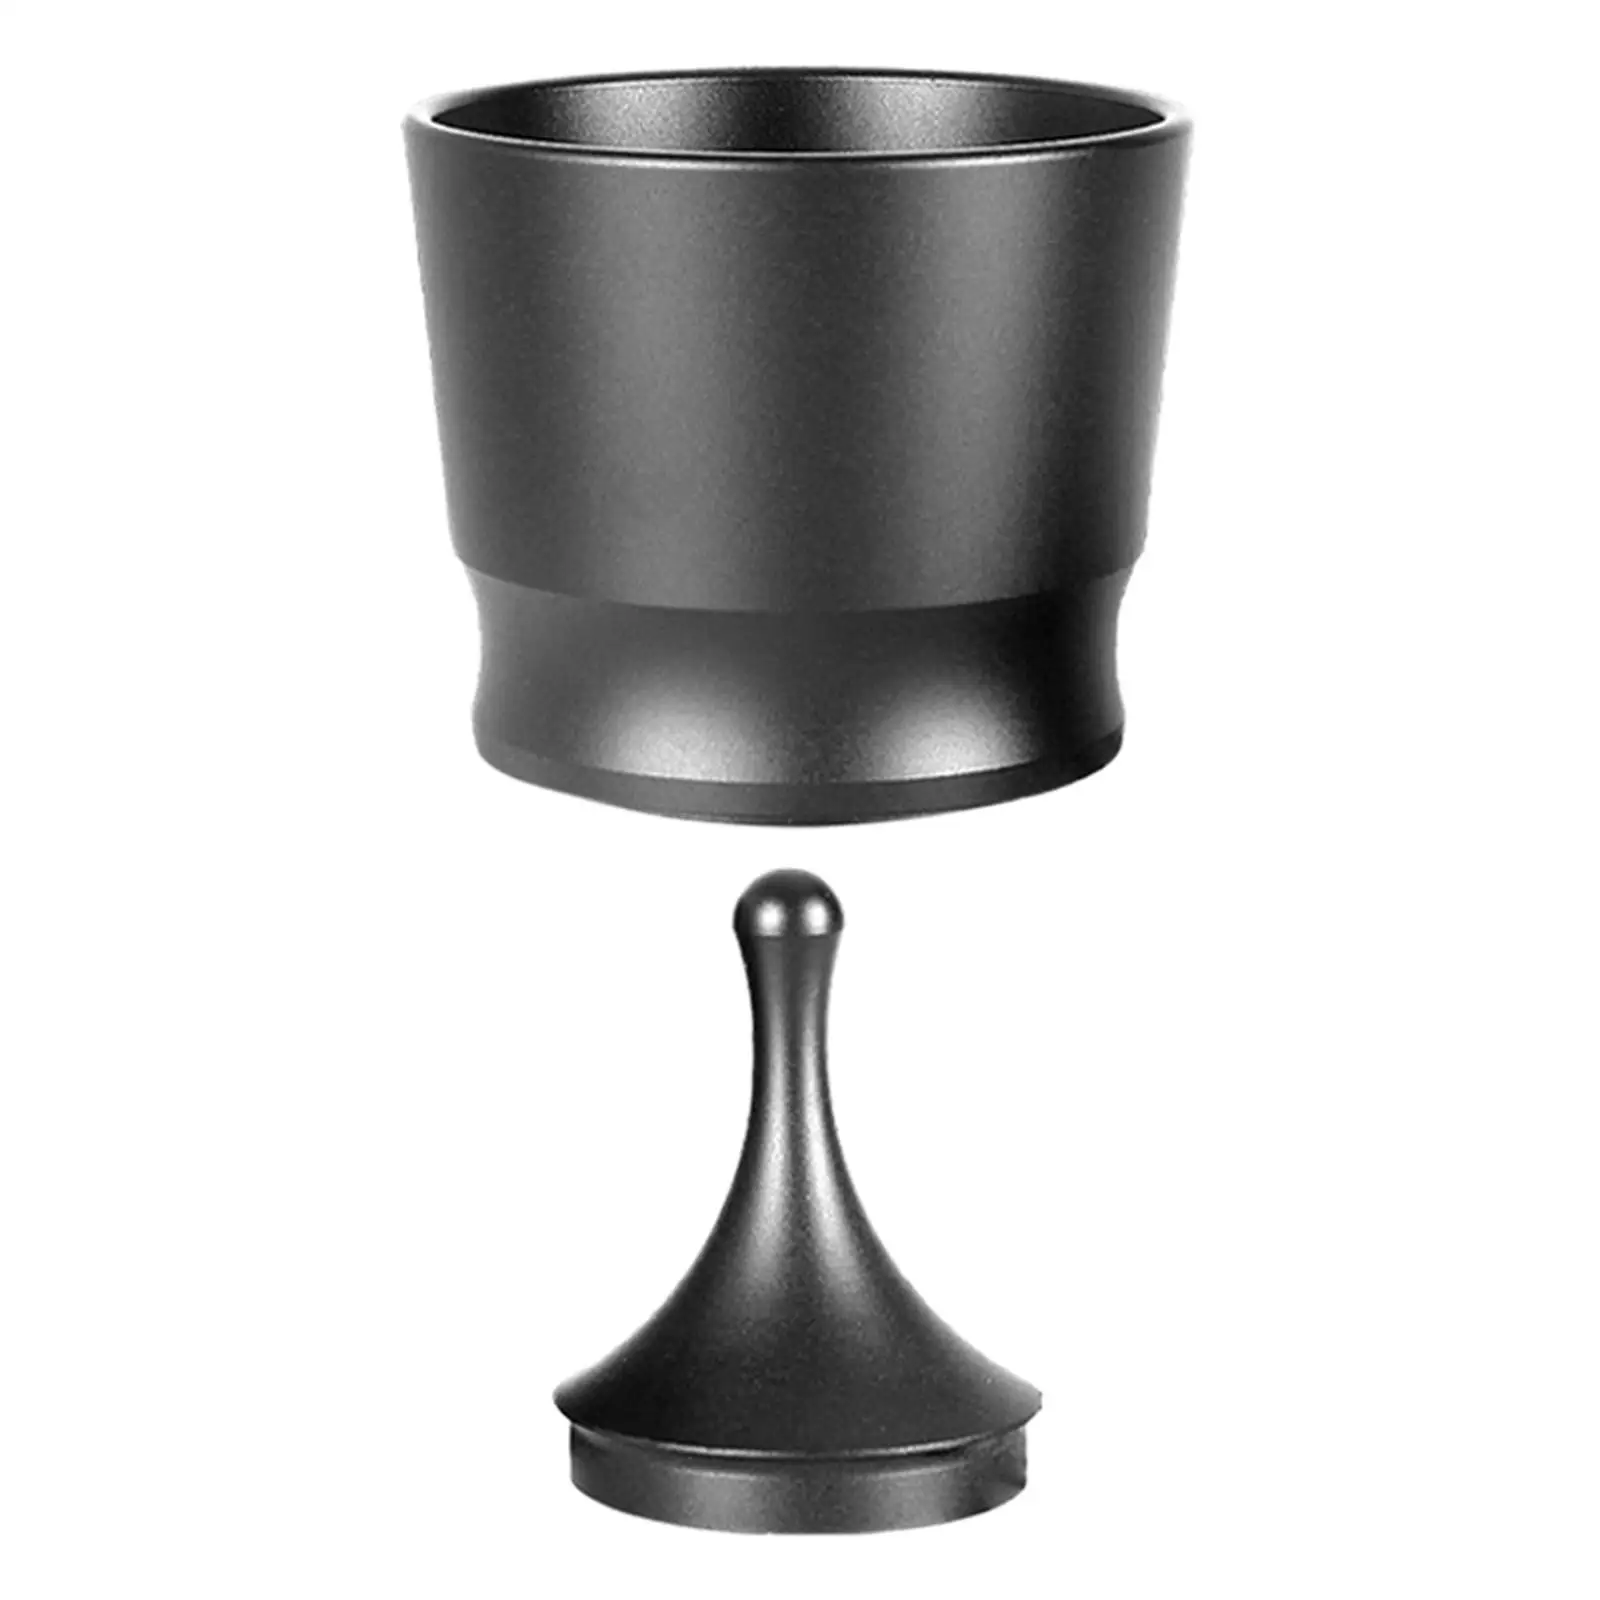 Coffee Dosing Cup Kitchen DIY Tools Coffee Dosing Cup Mugs for Bar Home Cafe